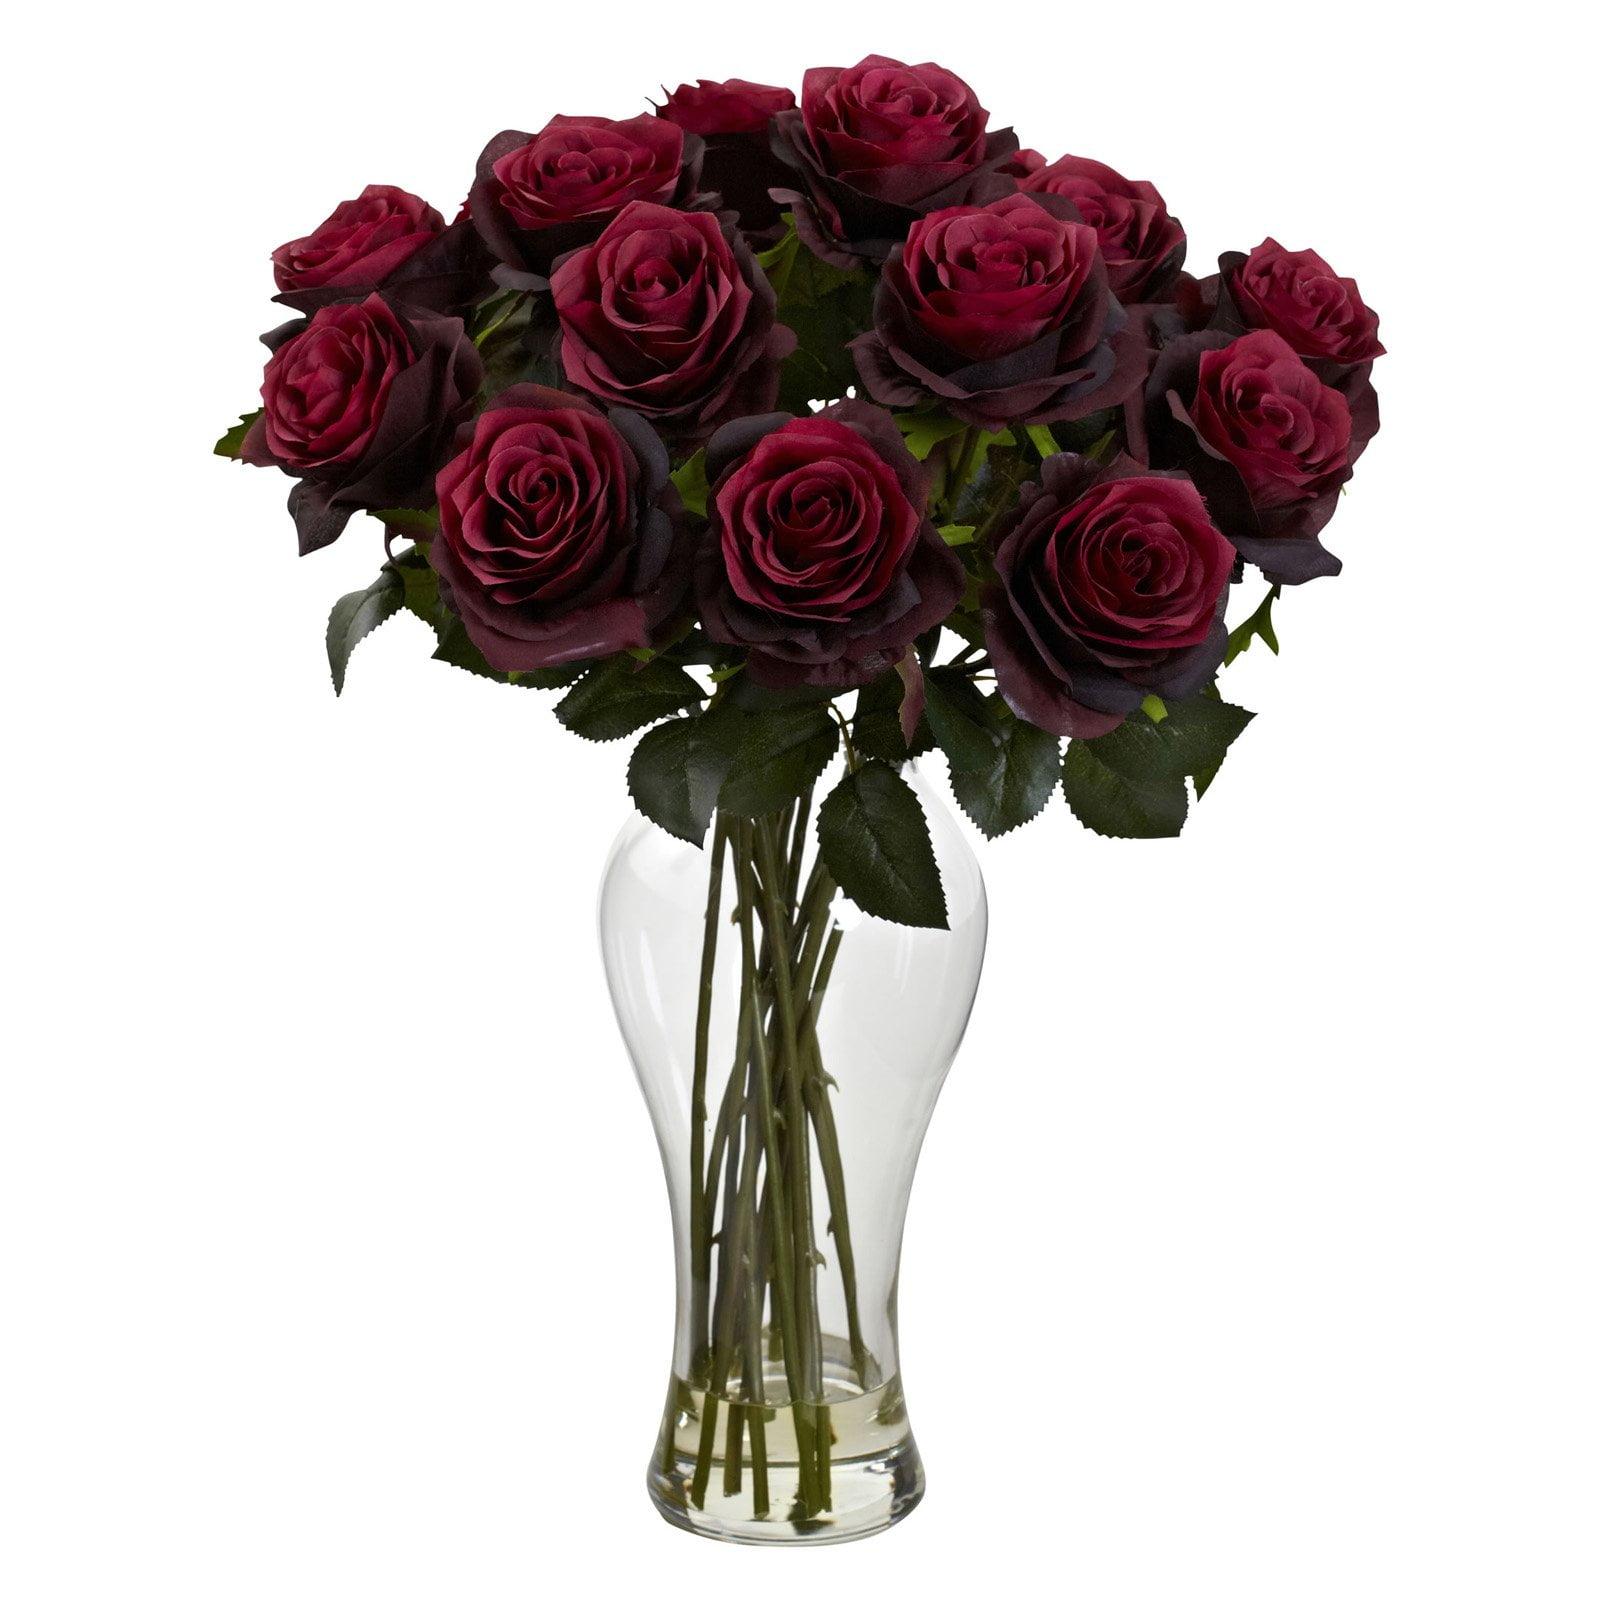 Burgundy Faux Rose Bouquet in Glass Vase, 7" x 23"